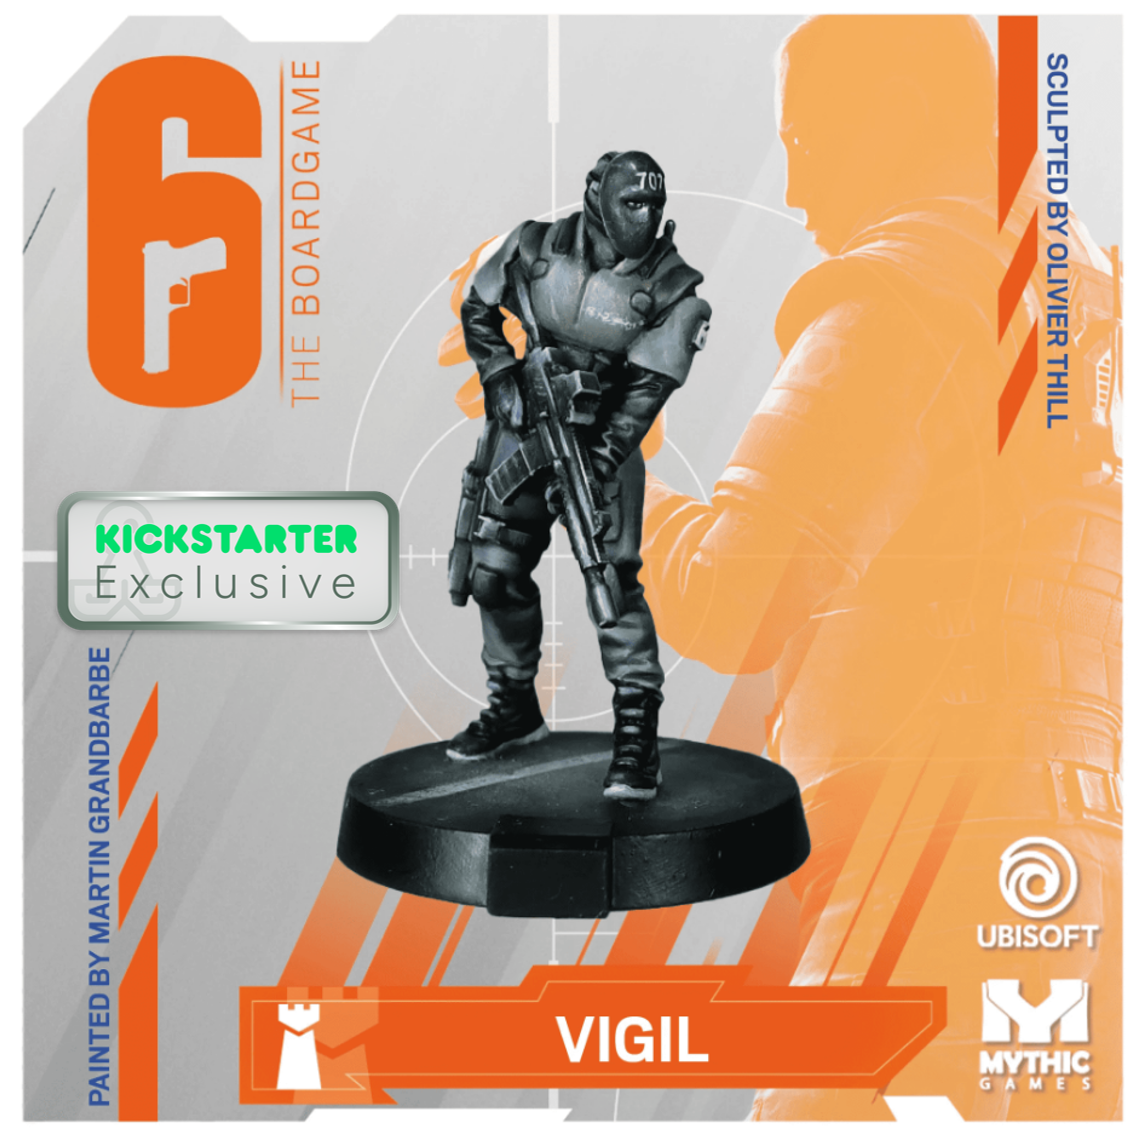 Kickstarter Exclusive Year 2 Expansion, Vigil Miniature, From 6: Siege - The Board Game